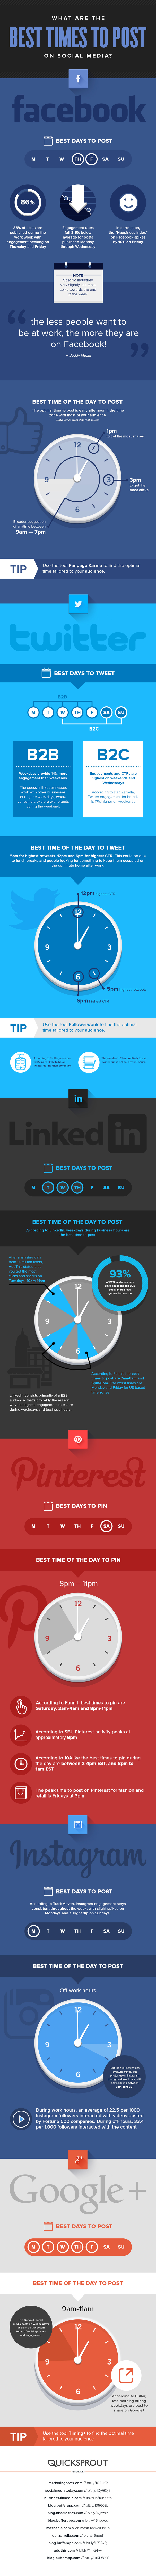 Best Times to post on social media